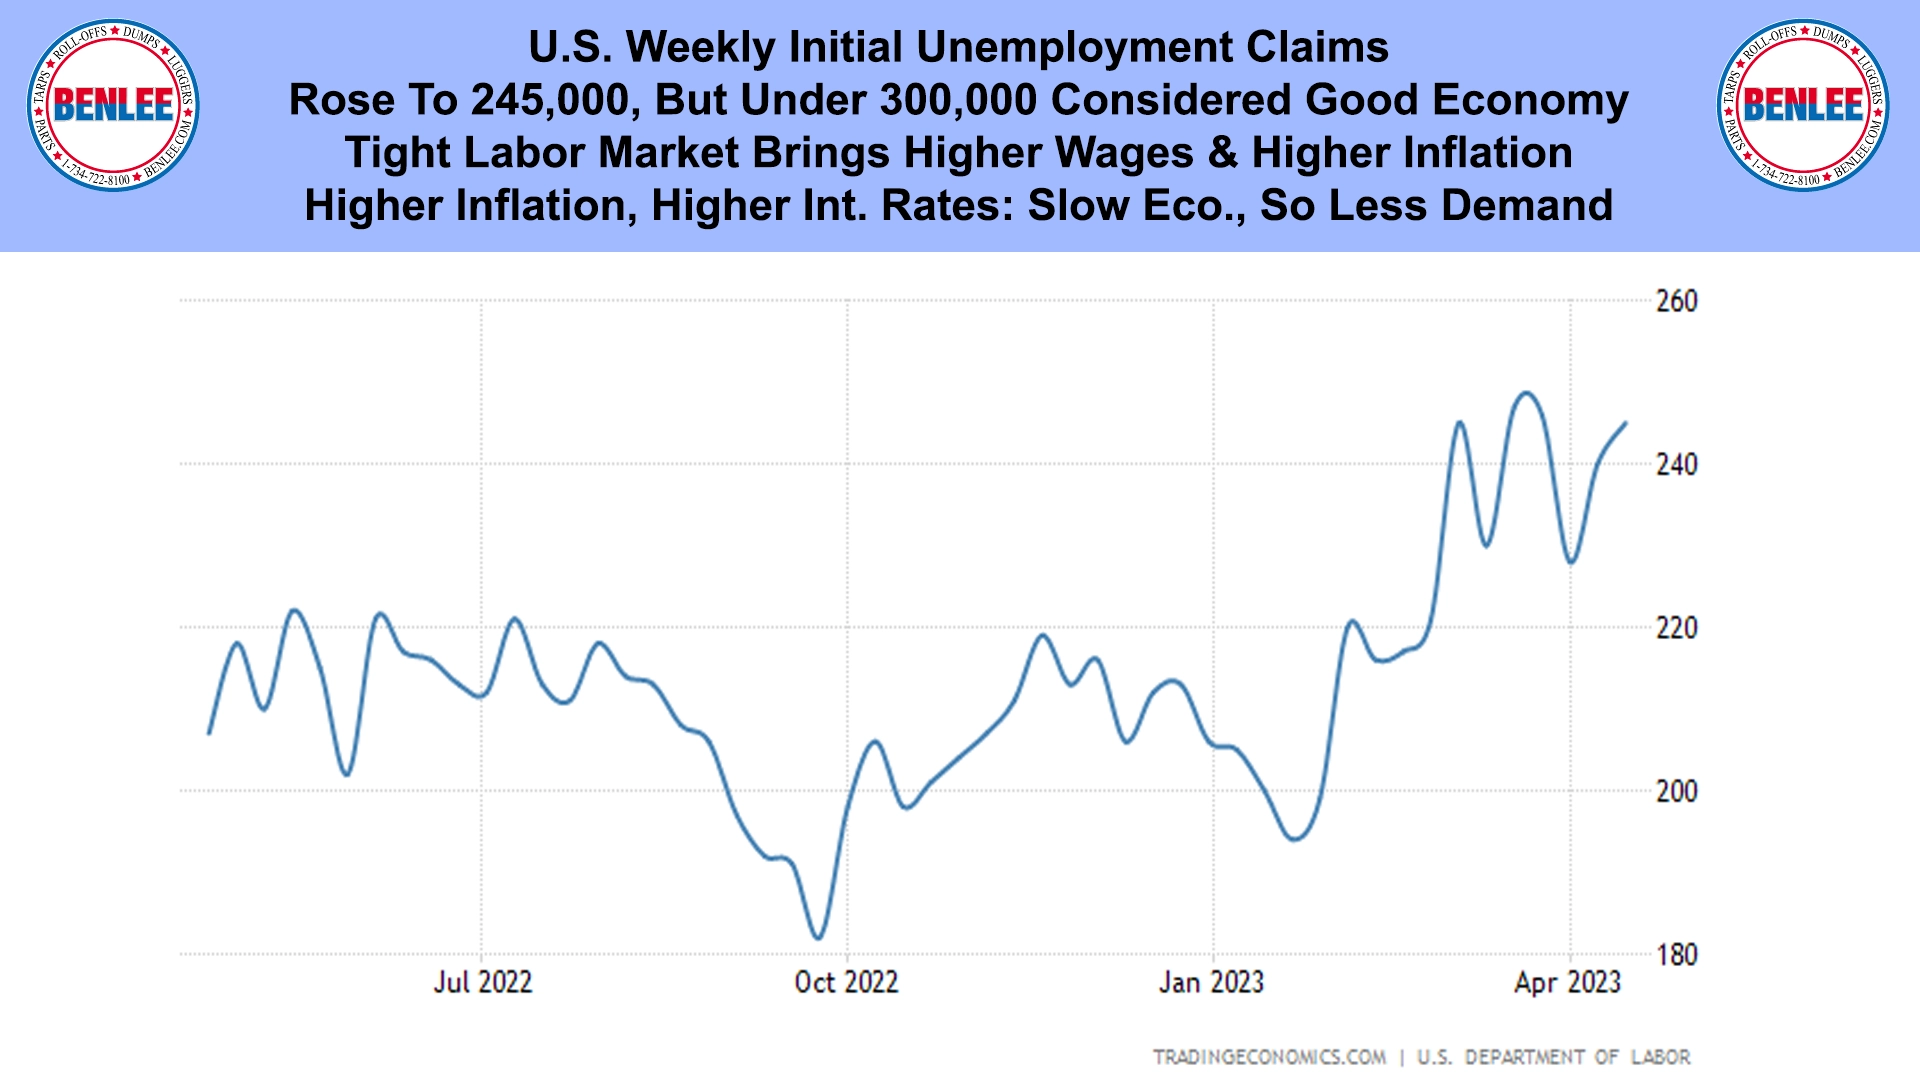 U.S. Weekly Initial Unemployment Claims